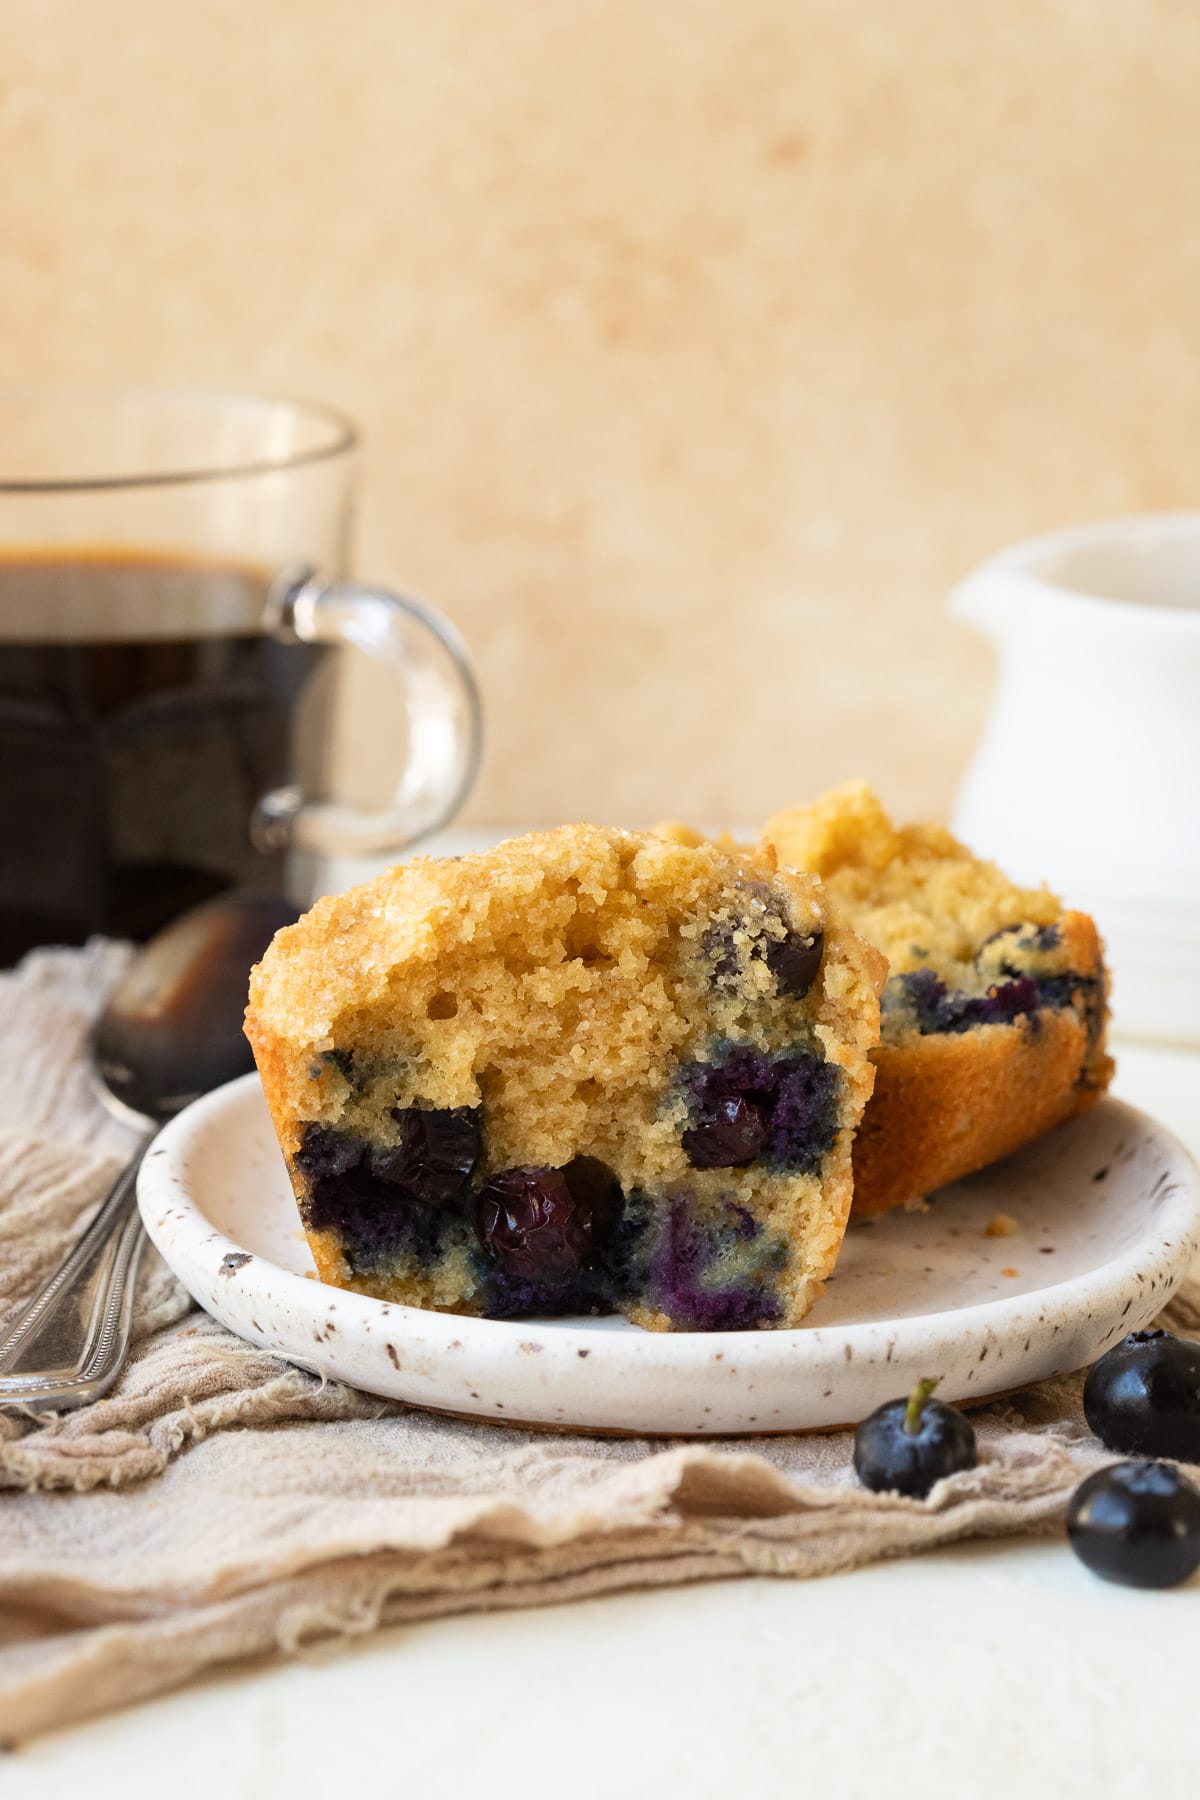 Blueberry almond flour muffin cut in half on a small white plate, served with coffee.